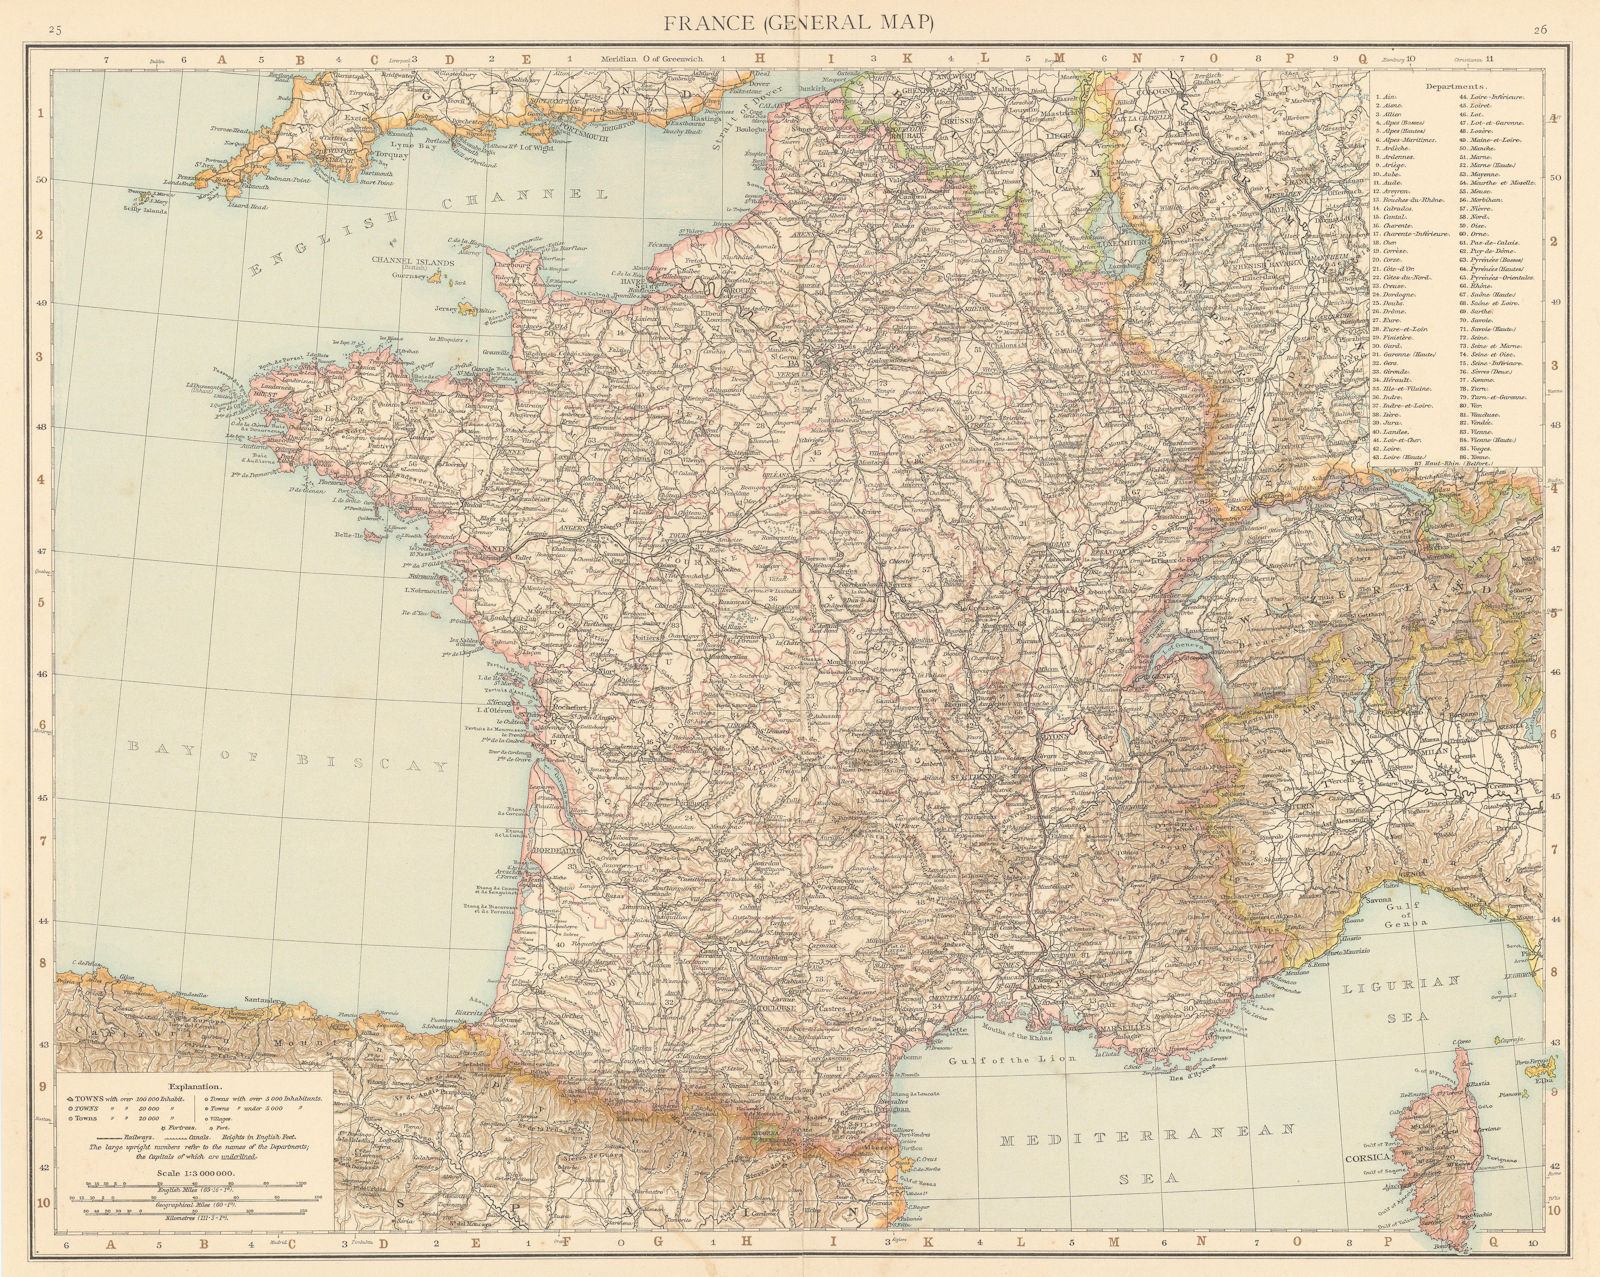 Associate Product France (General map) without Alsace & Lorraine. THE TIMES 1895 old antique